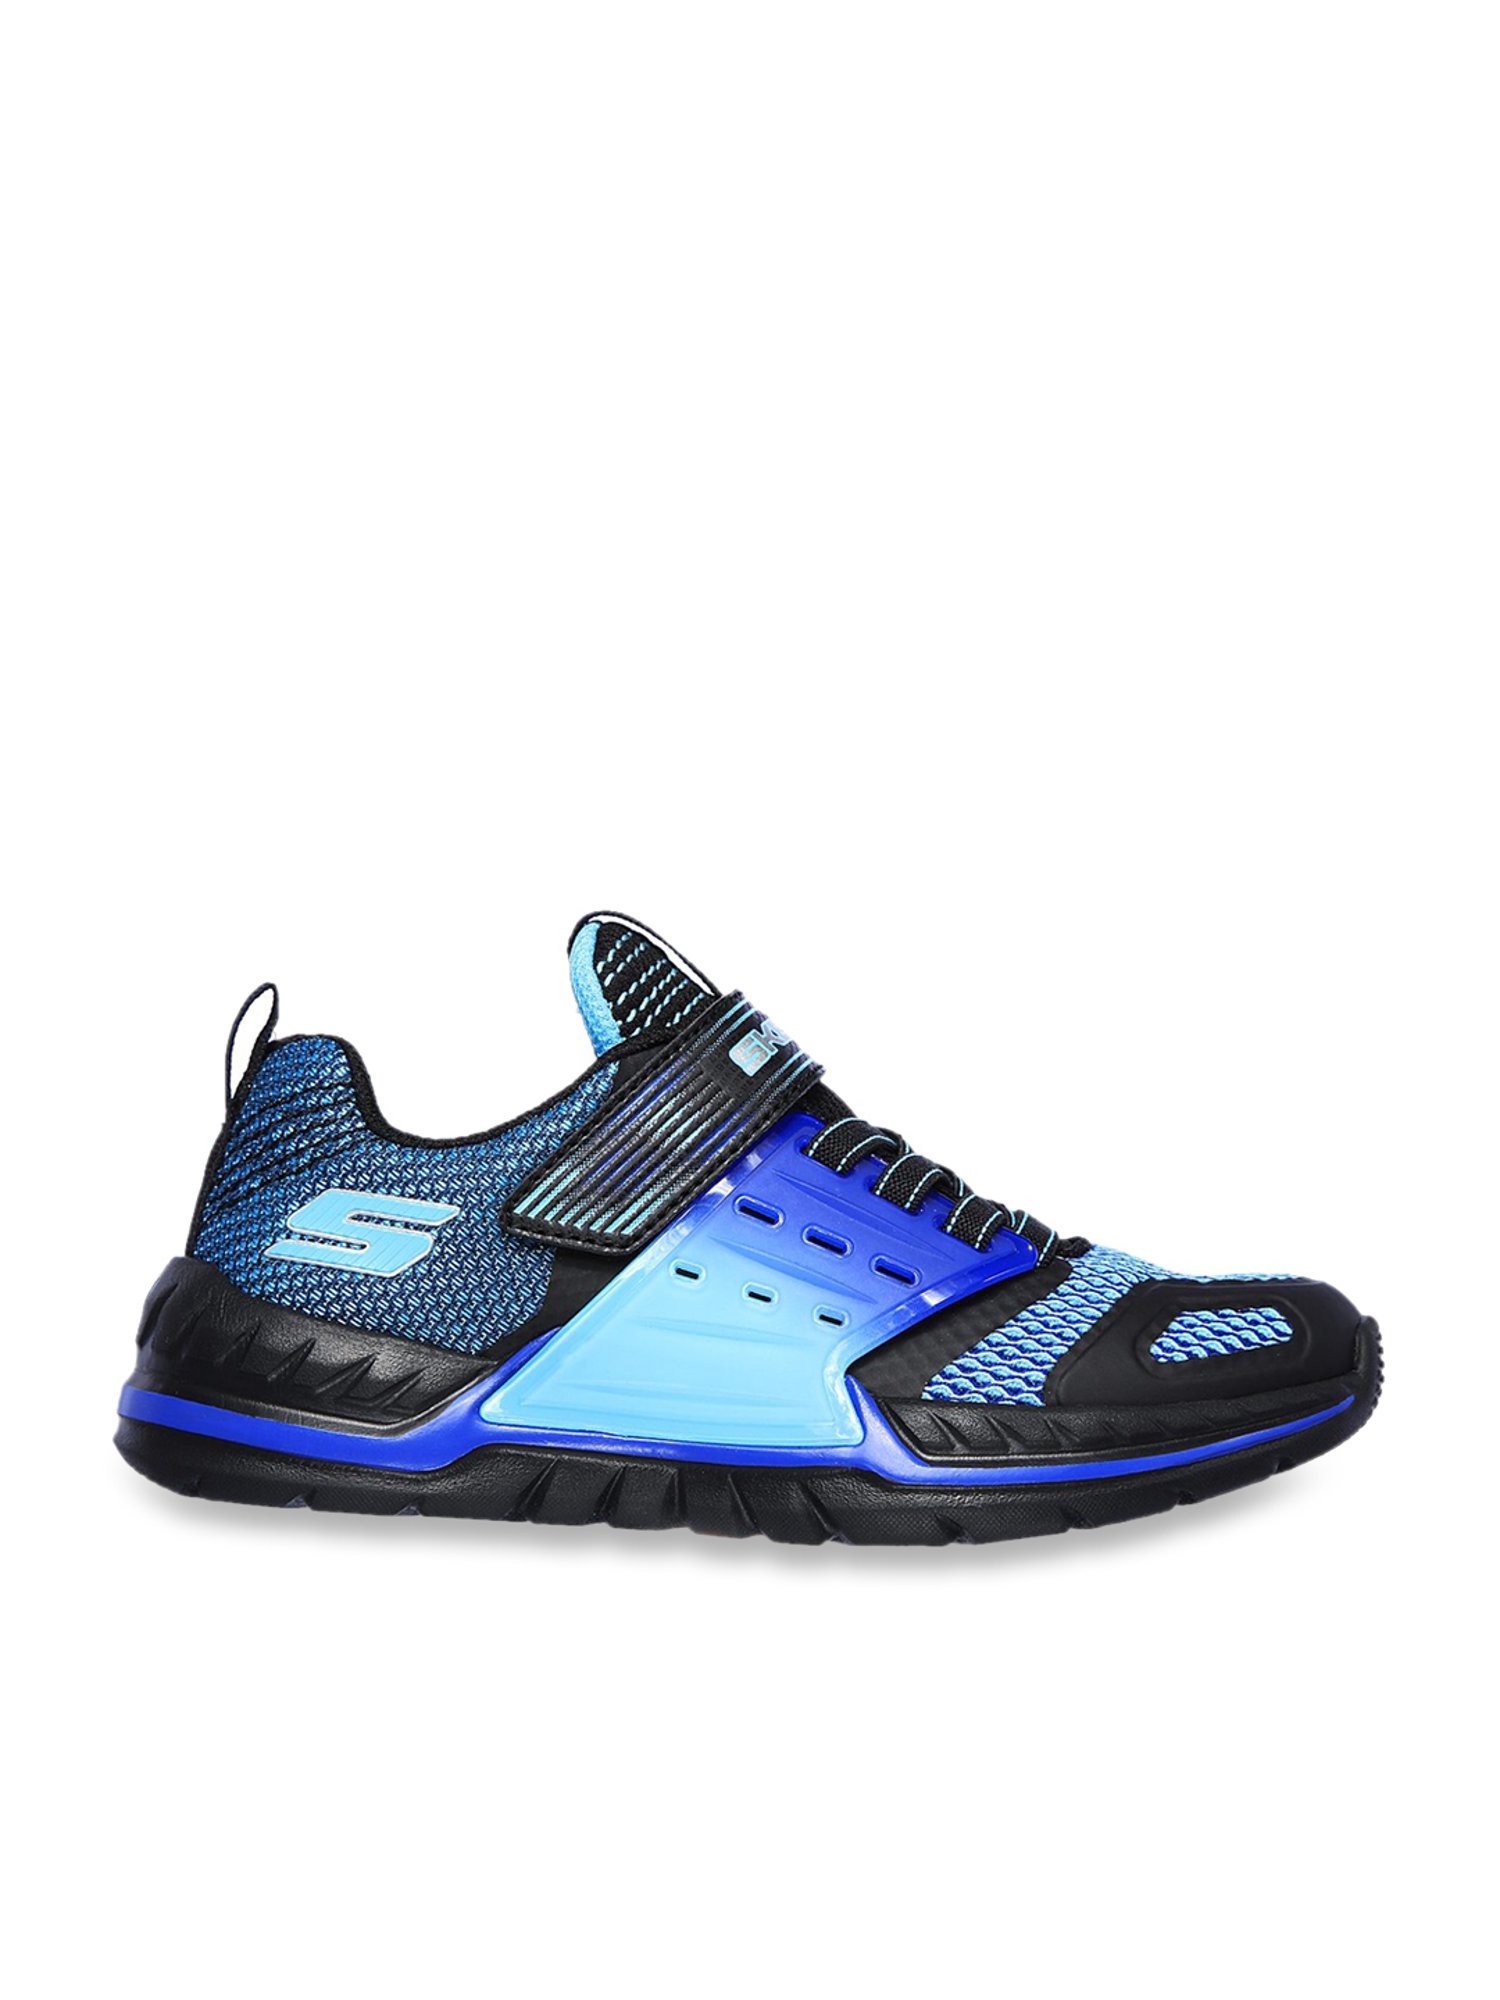 Buy Skechers Kids NITRATE 2.0 Black Blue Casual Sneakers for Boys at Best Price @ Tata CLiQ